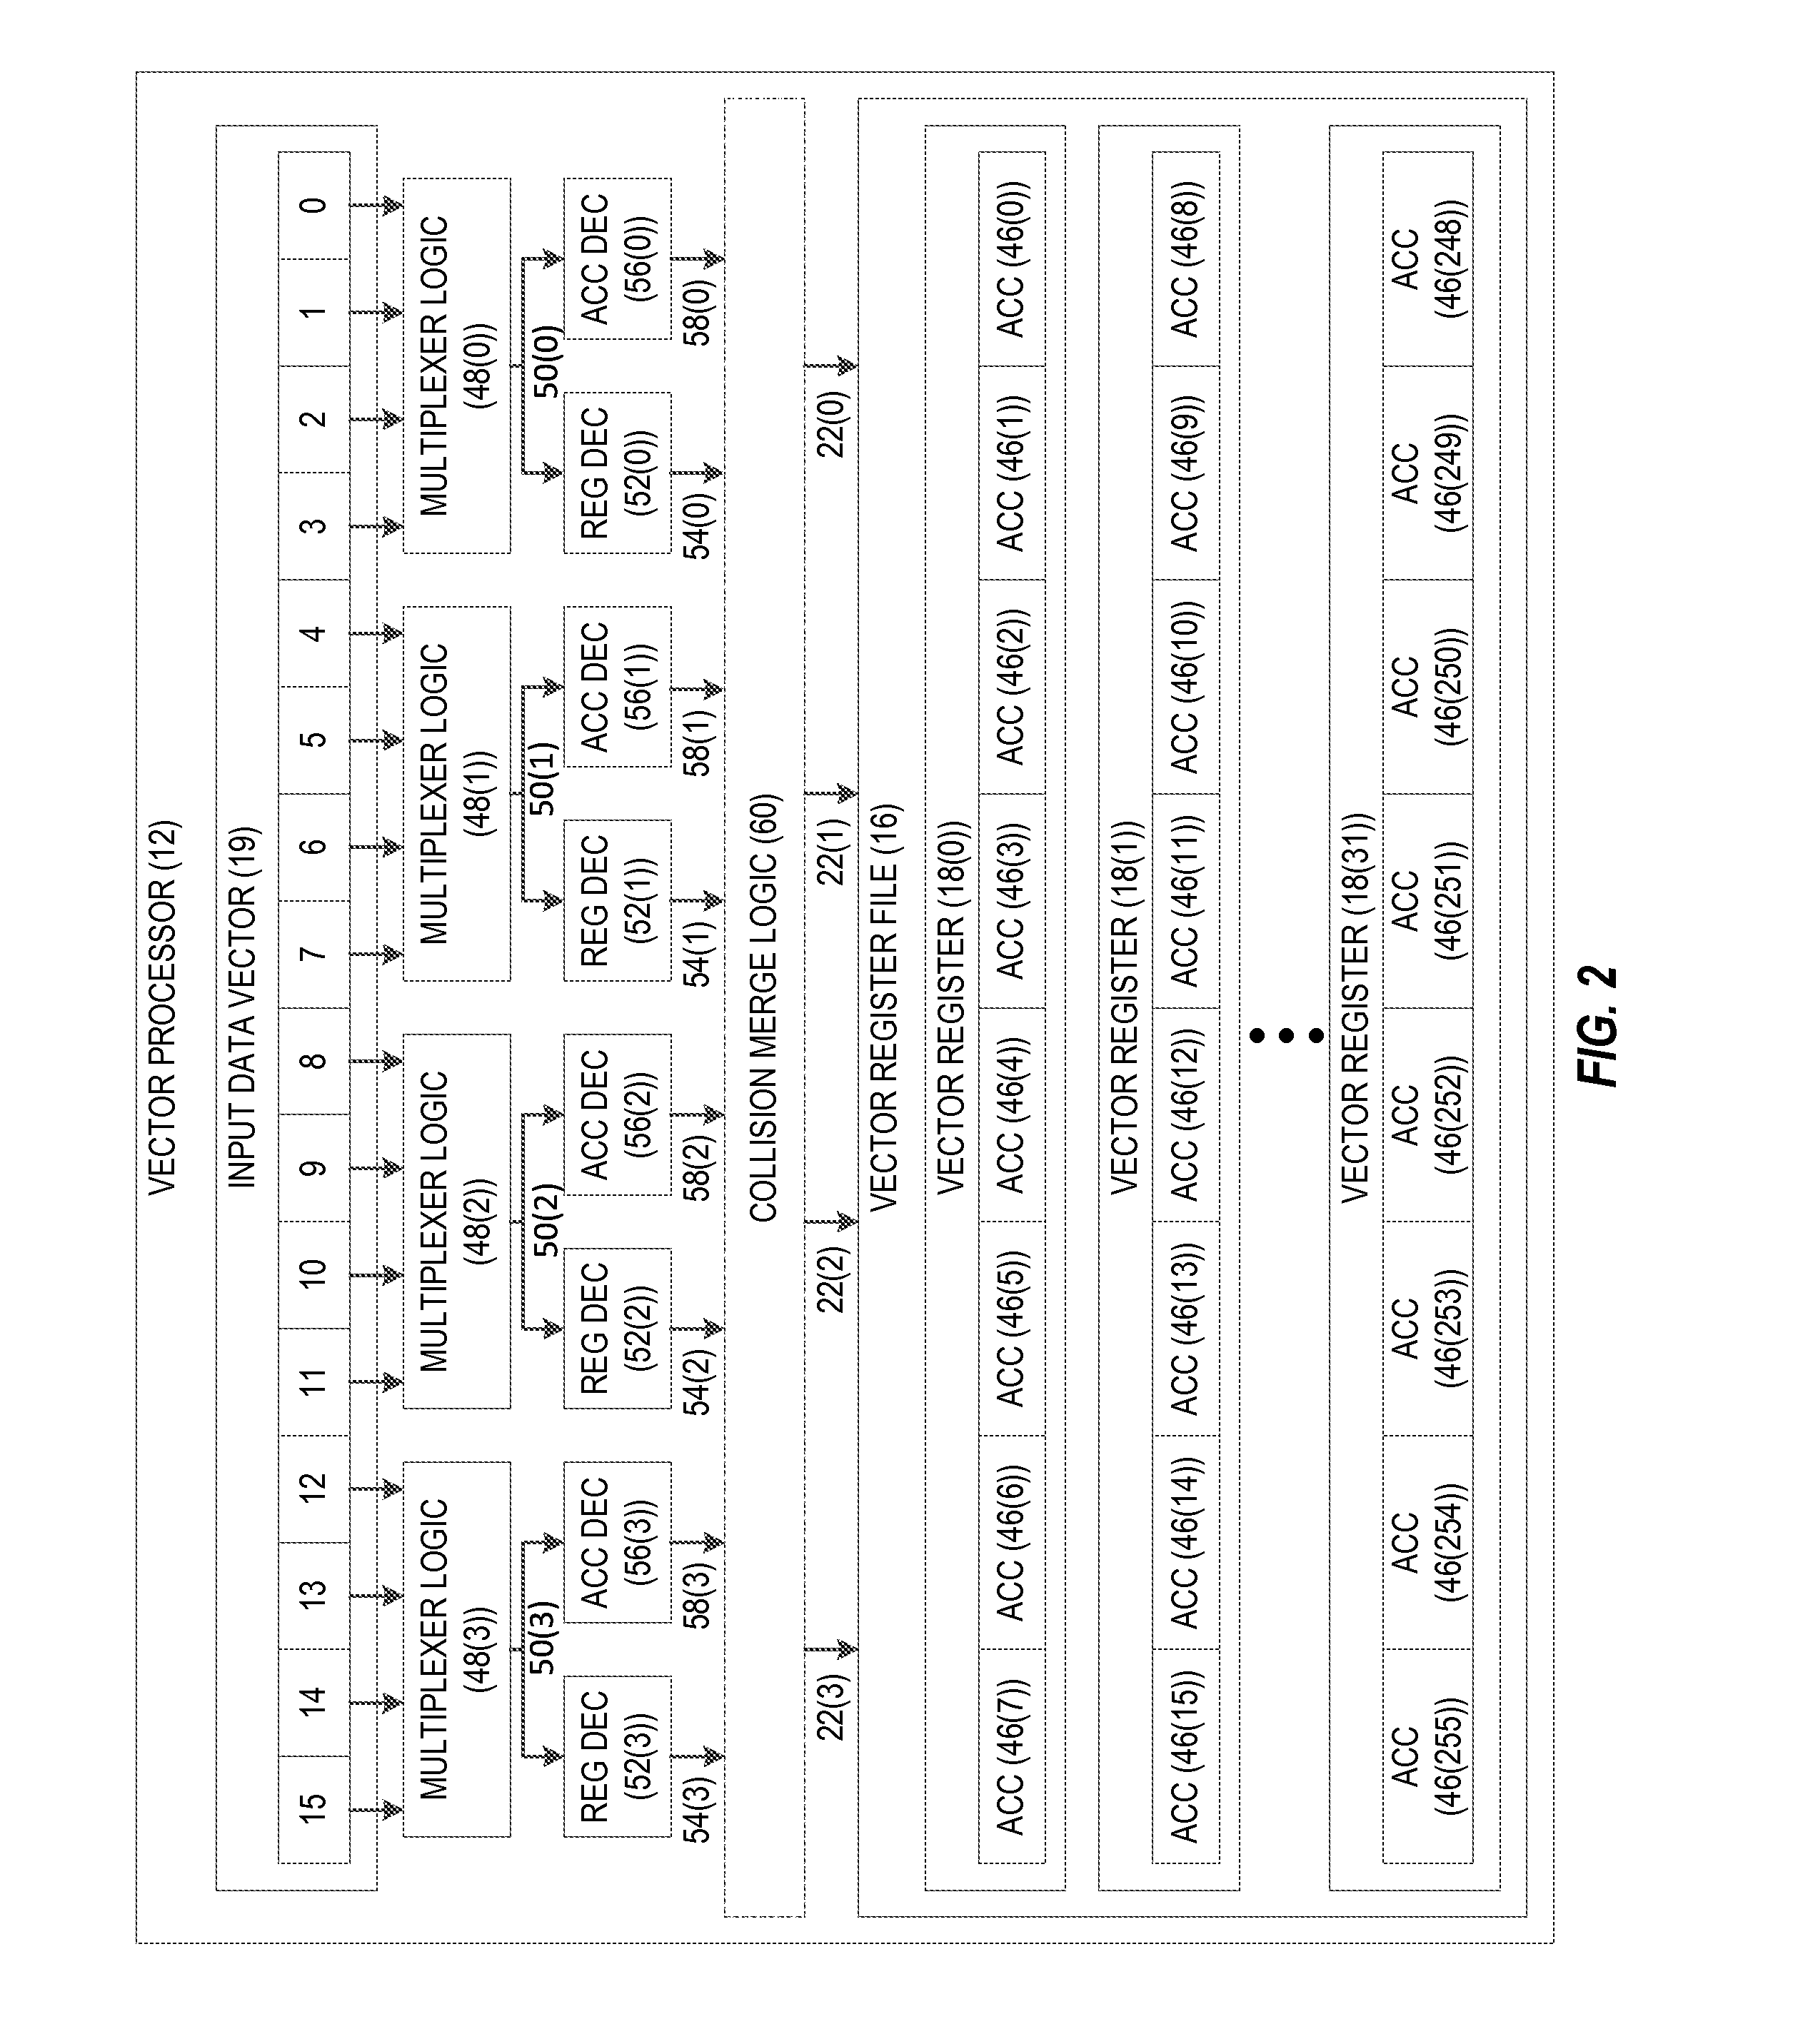 Parallelization of scalar operations by vector processors using data-indexed accumulators in vector register files, and related circuits, methods, and computer-readable media